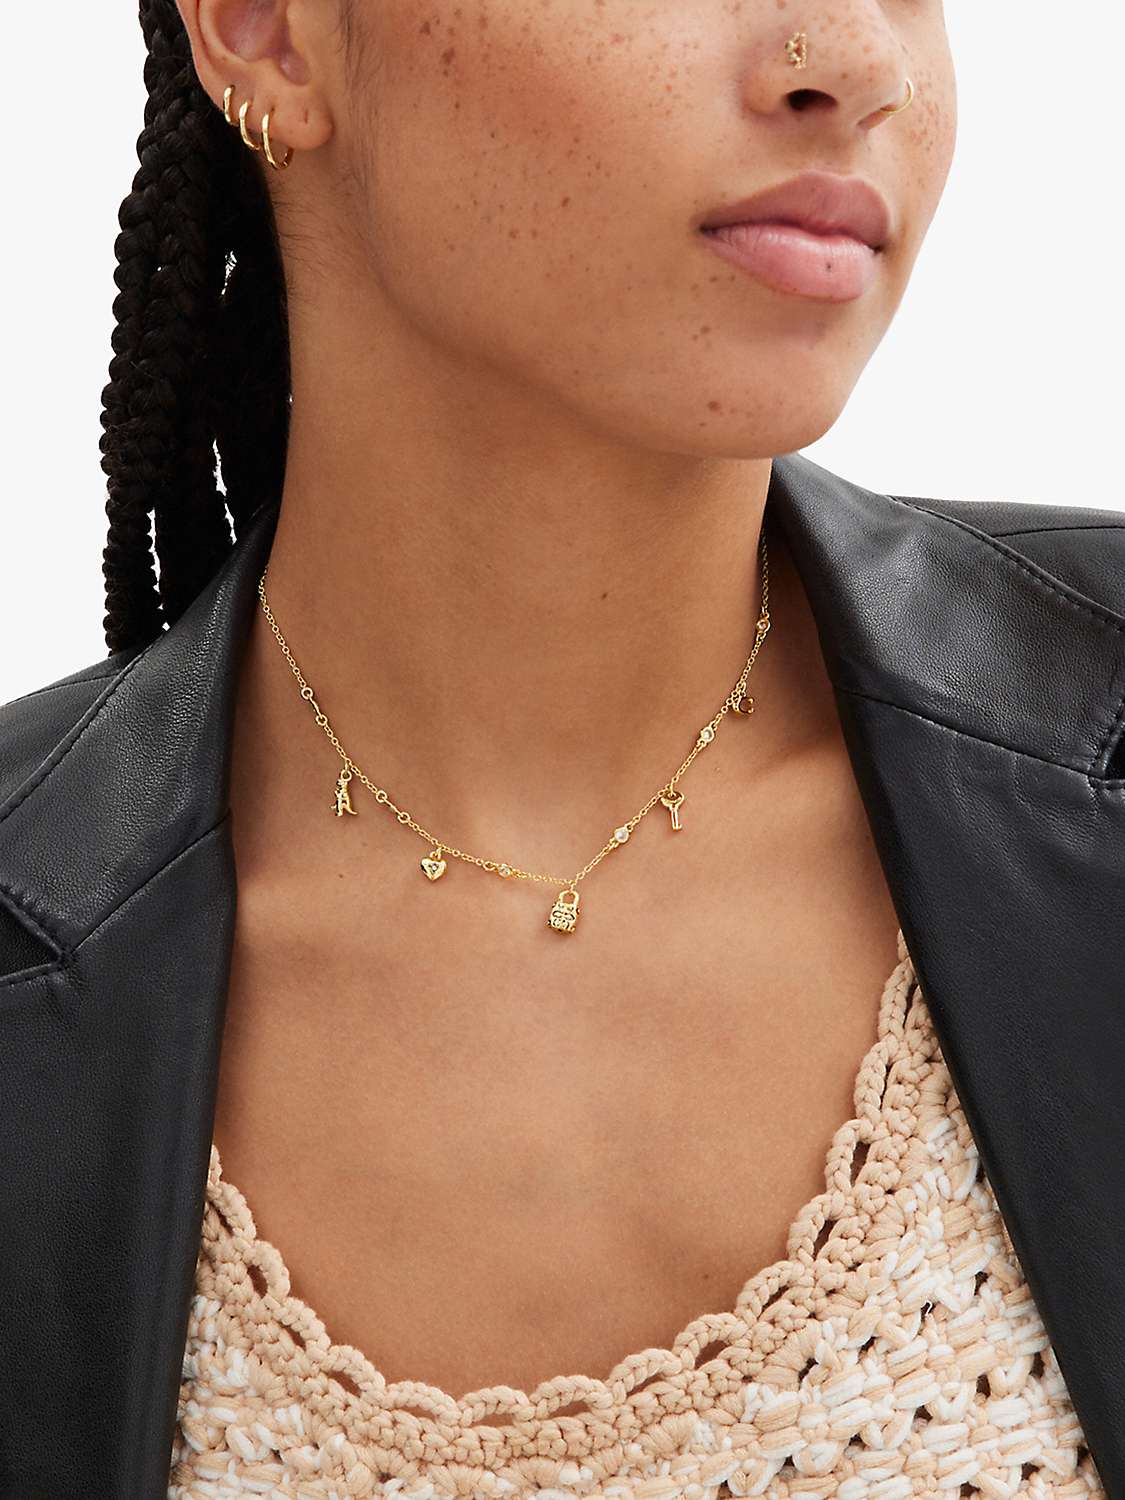 Buy Coach Signature Charm Chain Necklace, Gold Online at johnlewis.com